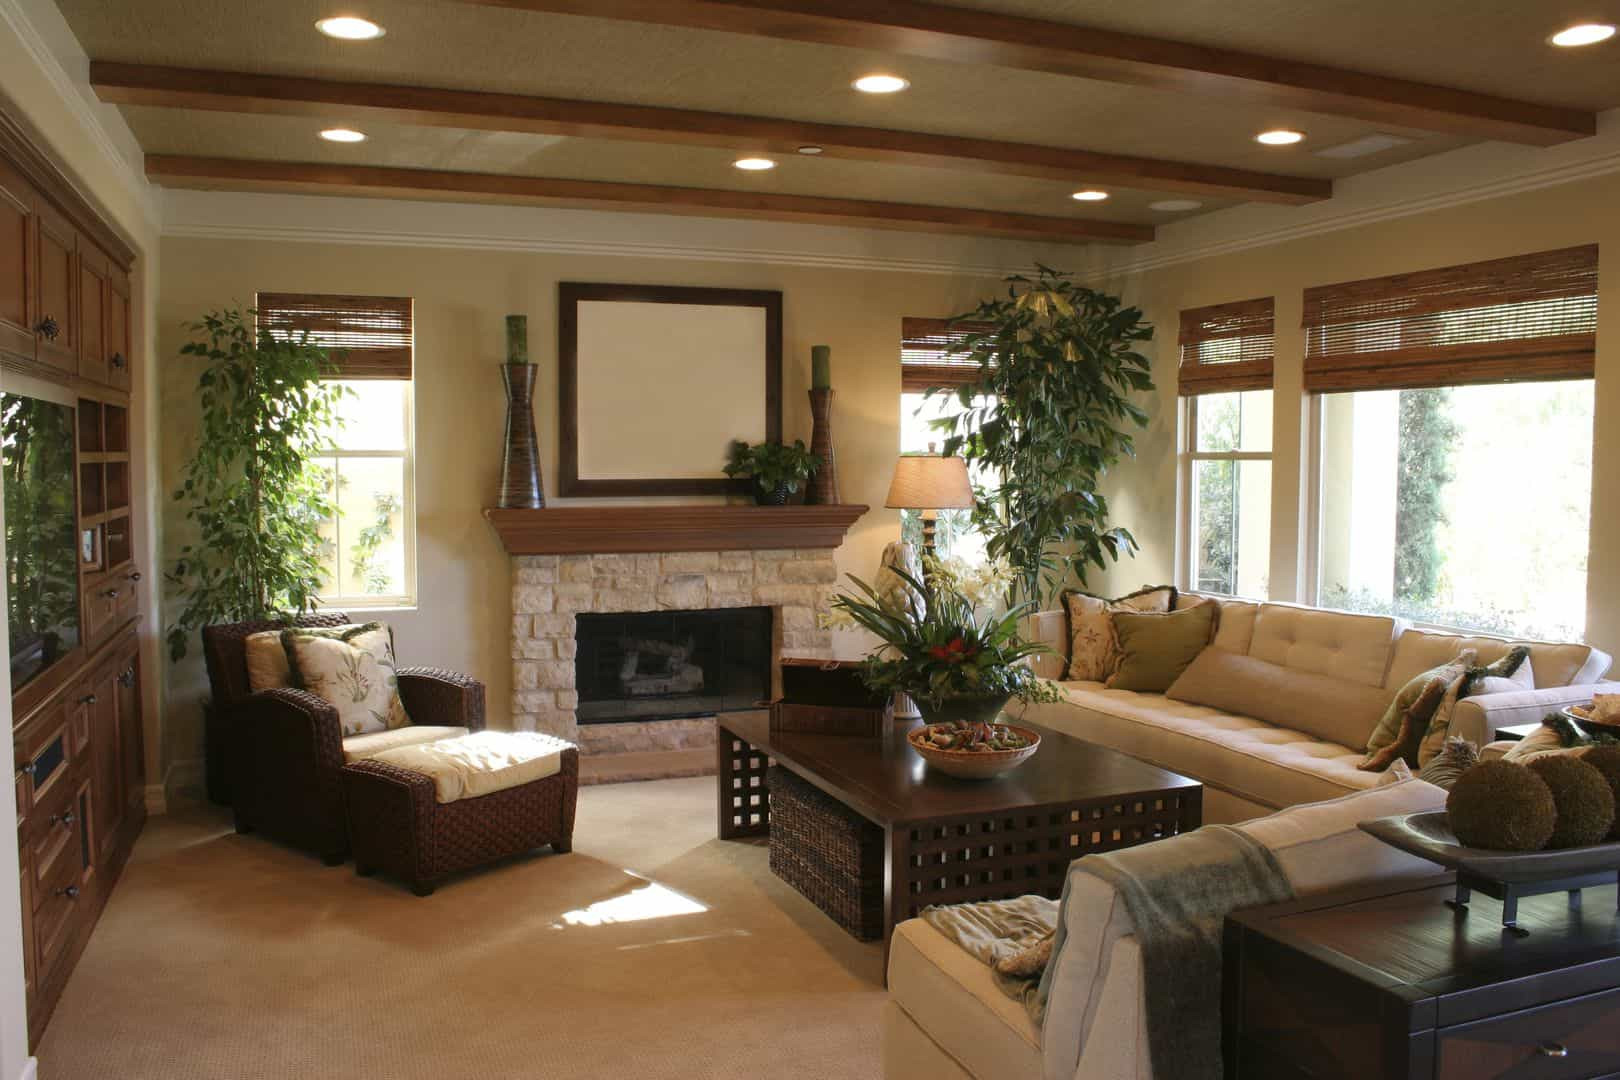 Recessed Lights Living Room
 Living Room With Tall Houseplants And Recessed Lighting